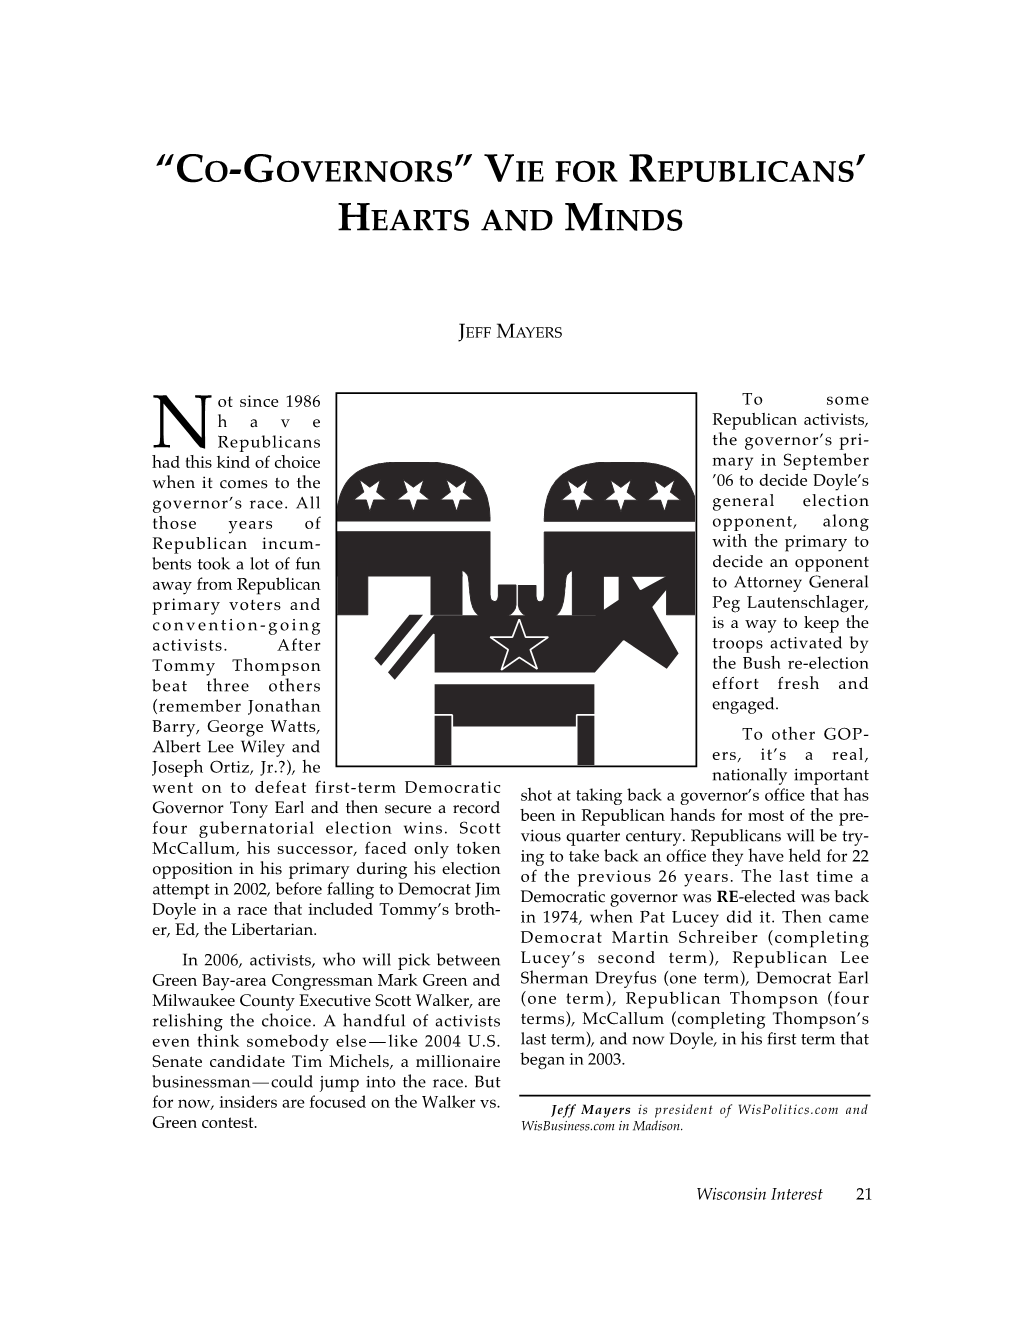 "Co-Governors Vie for Republicans' Hearts and Minds